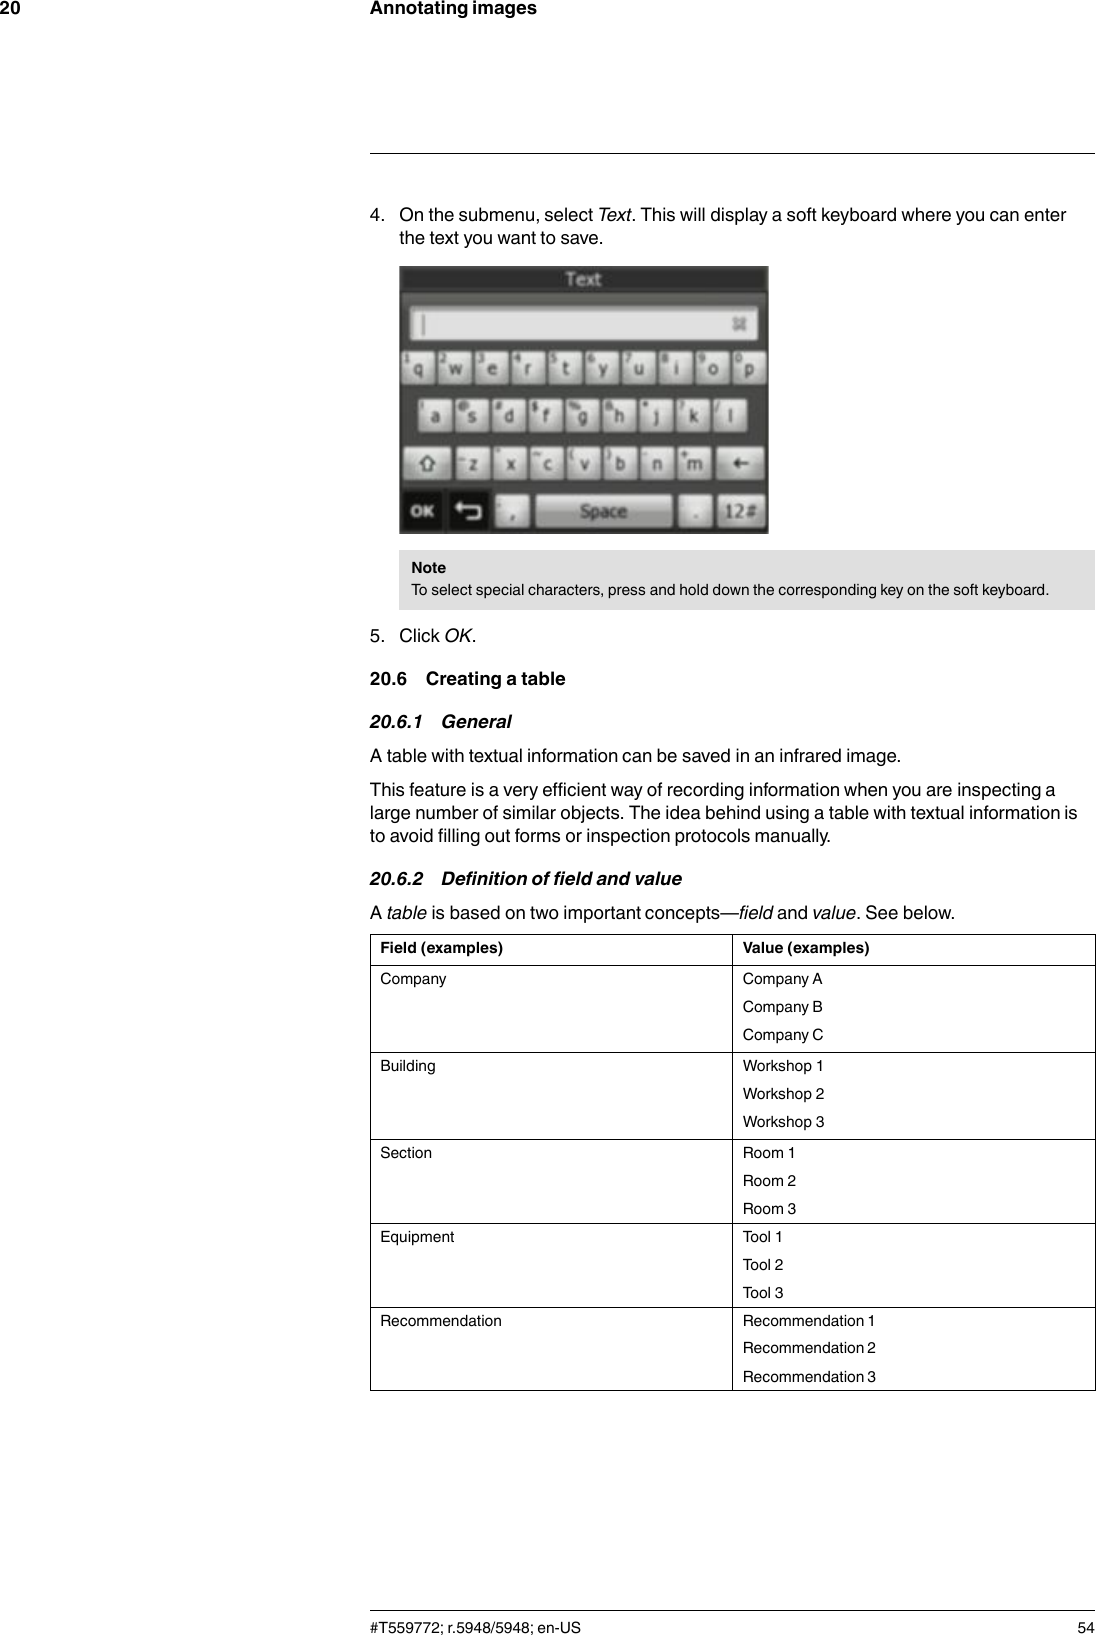 Annotating images204. On the submenu, select Text. This will display a soft keyboard where you can enterthe text you want to save.NoteTo select special characters, press and hold down the corresponding key on the soft keyboard.5. Click OK.20.6 Creating a table20.6.1 GeneralA table with textual information can be saved in an infrared image.This feature is a very efficient way of recording information when you are inspecting alarge number of similar objects. The idea behind using a table with textual information isto avoid filling out forms or inspection protocols manually.20.6.2 Definition of field and valueAtable is based on two important concepts—field and value. See below.Field (examples) Value (examples)Company Company ACompany BCompany CBuilding Workshop 1Workshop 2Workshop 3Section Room 1Room 2Room 3Equipment Tool 1Tool 2Tool 3Recommendation Recommendation 1Recommendation 2Recommendation 3#T559772; r.5948/5948; en-US 54